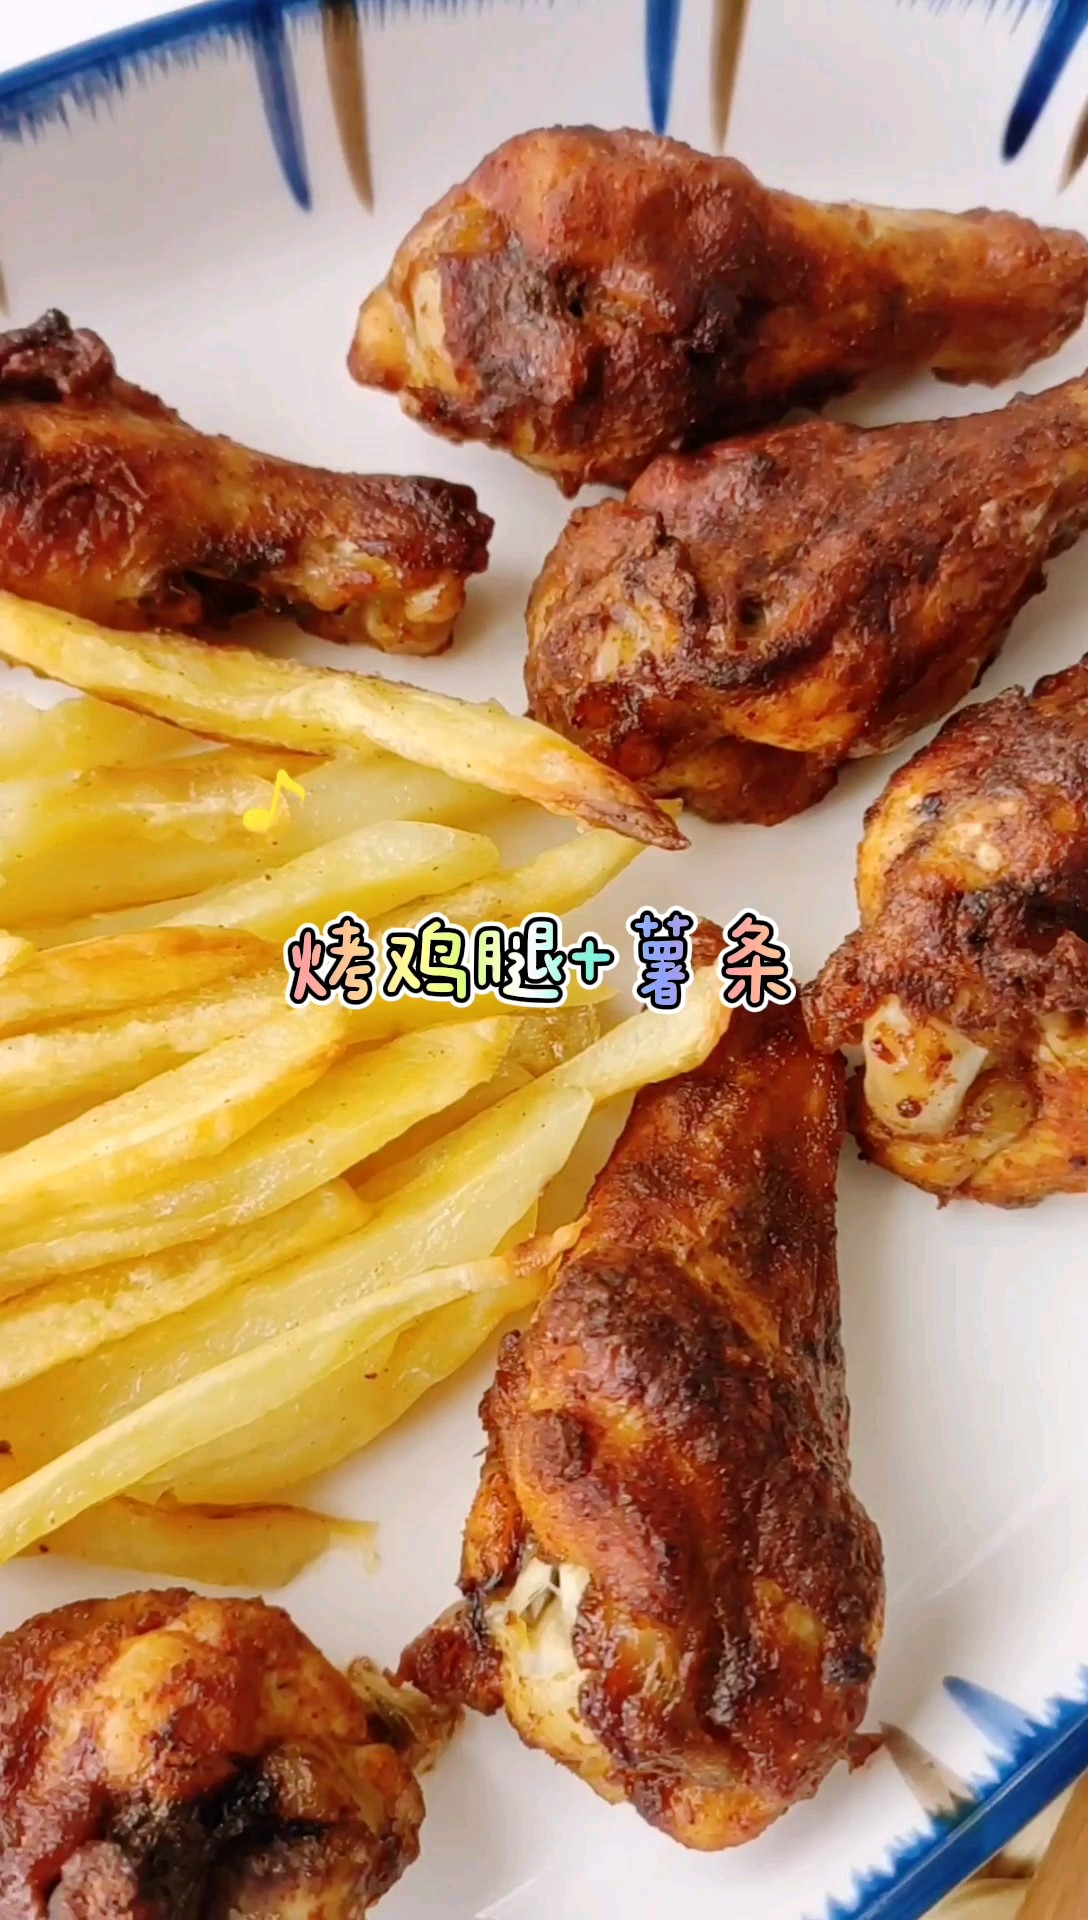 Roasted Chicken Drumsticks + French Fries recipe